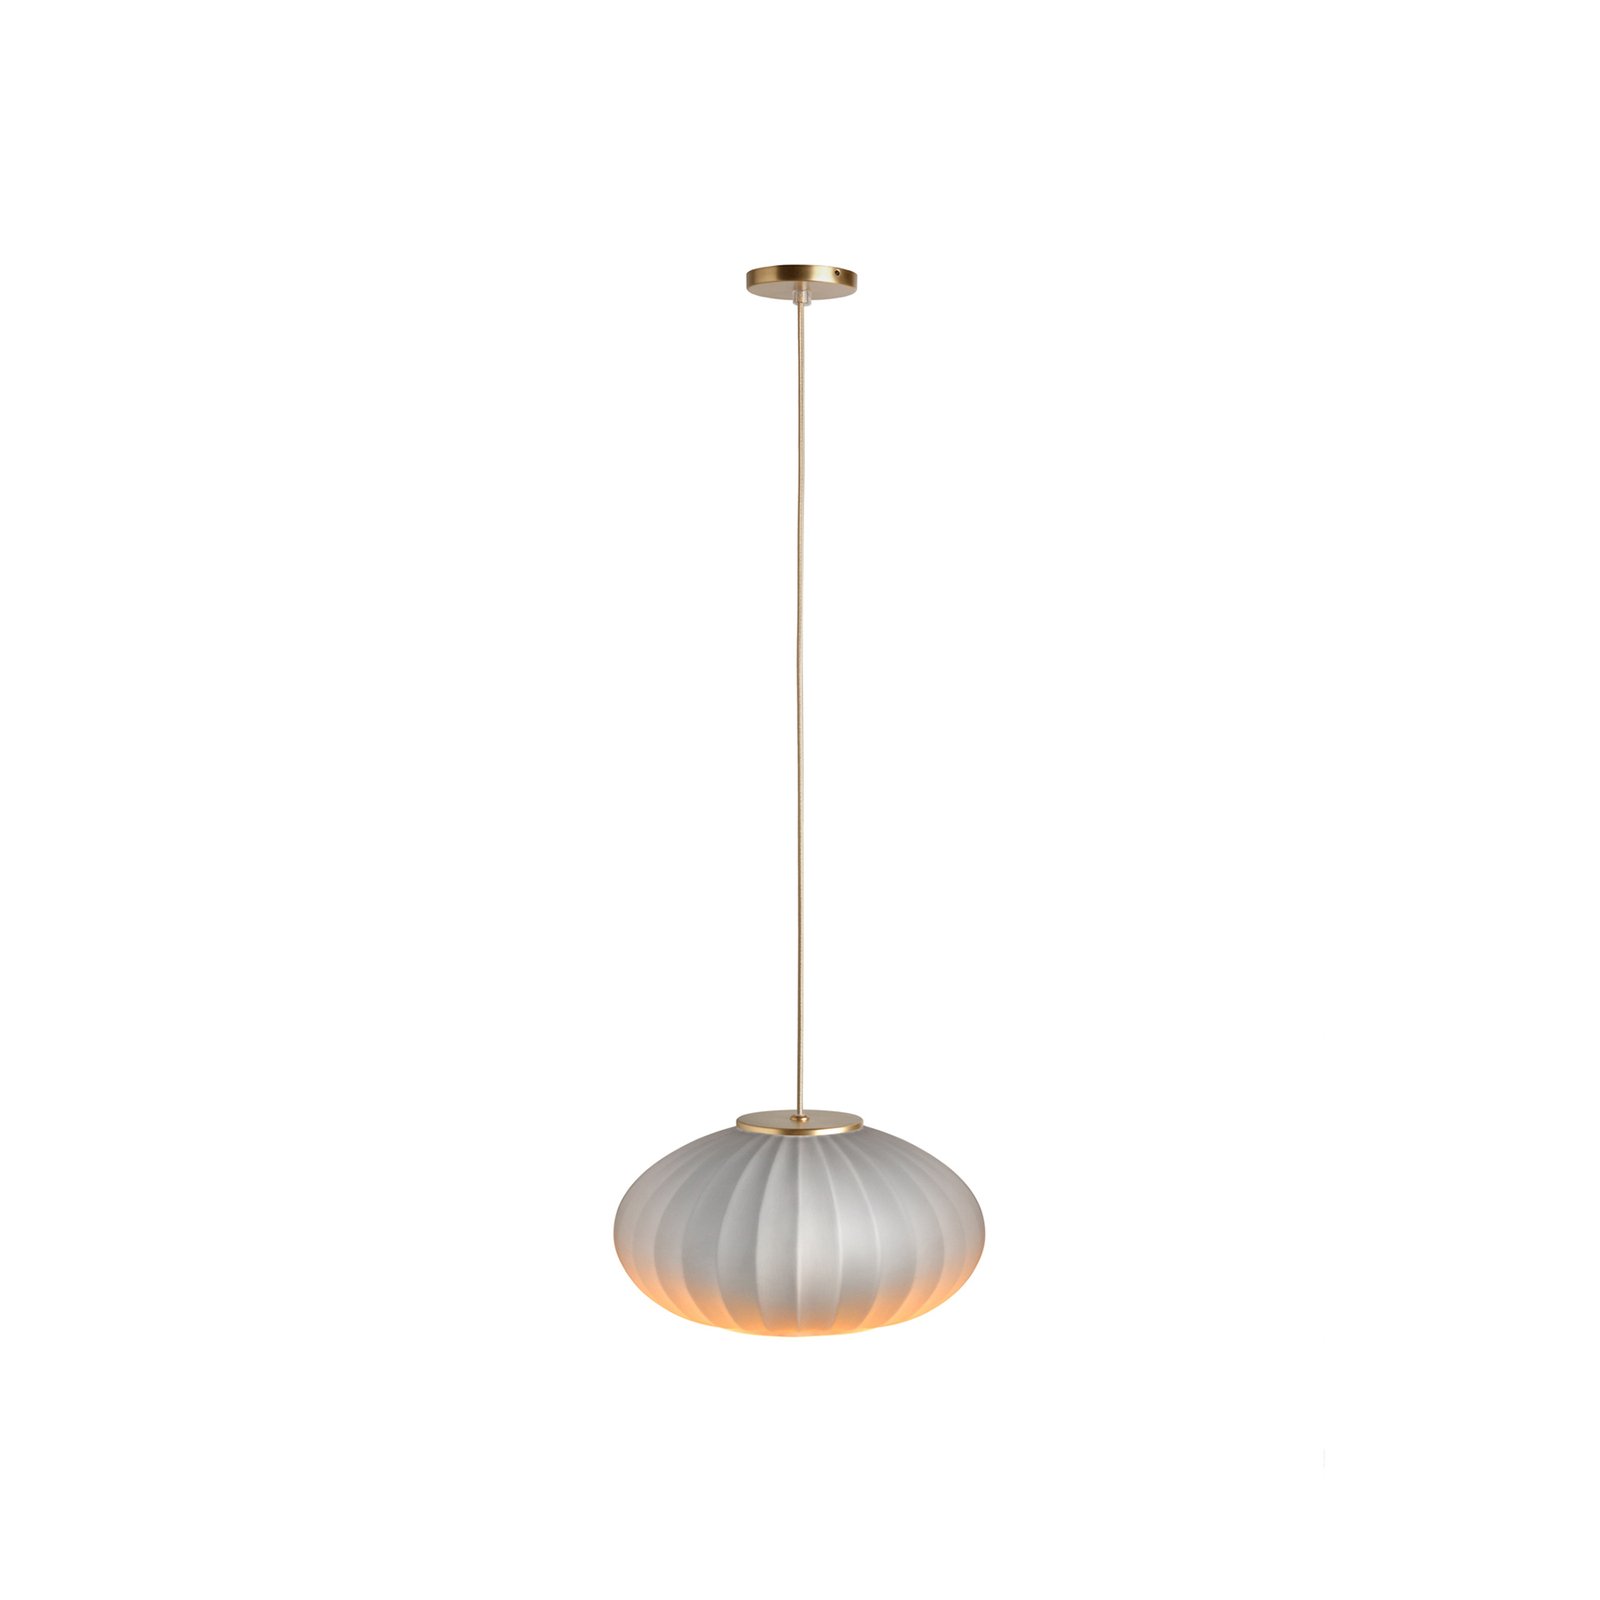 Mei pendant light, flat oval lampshade, gold